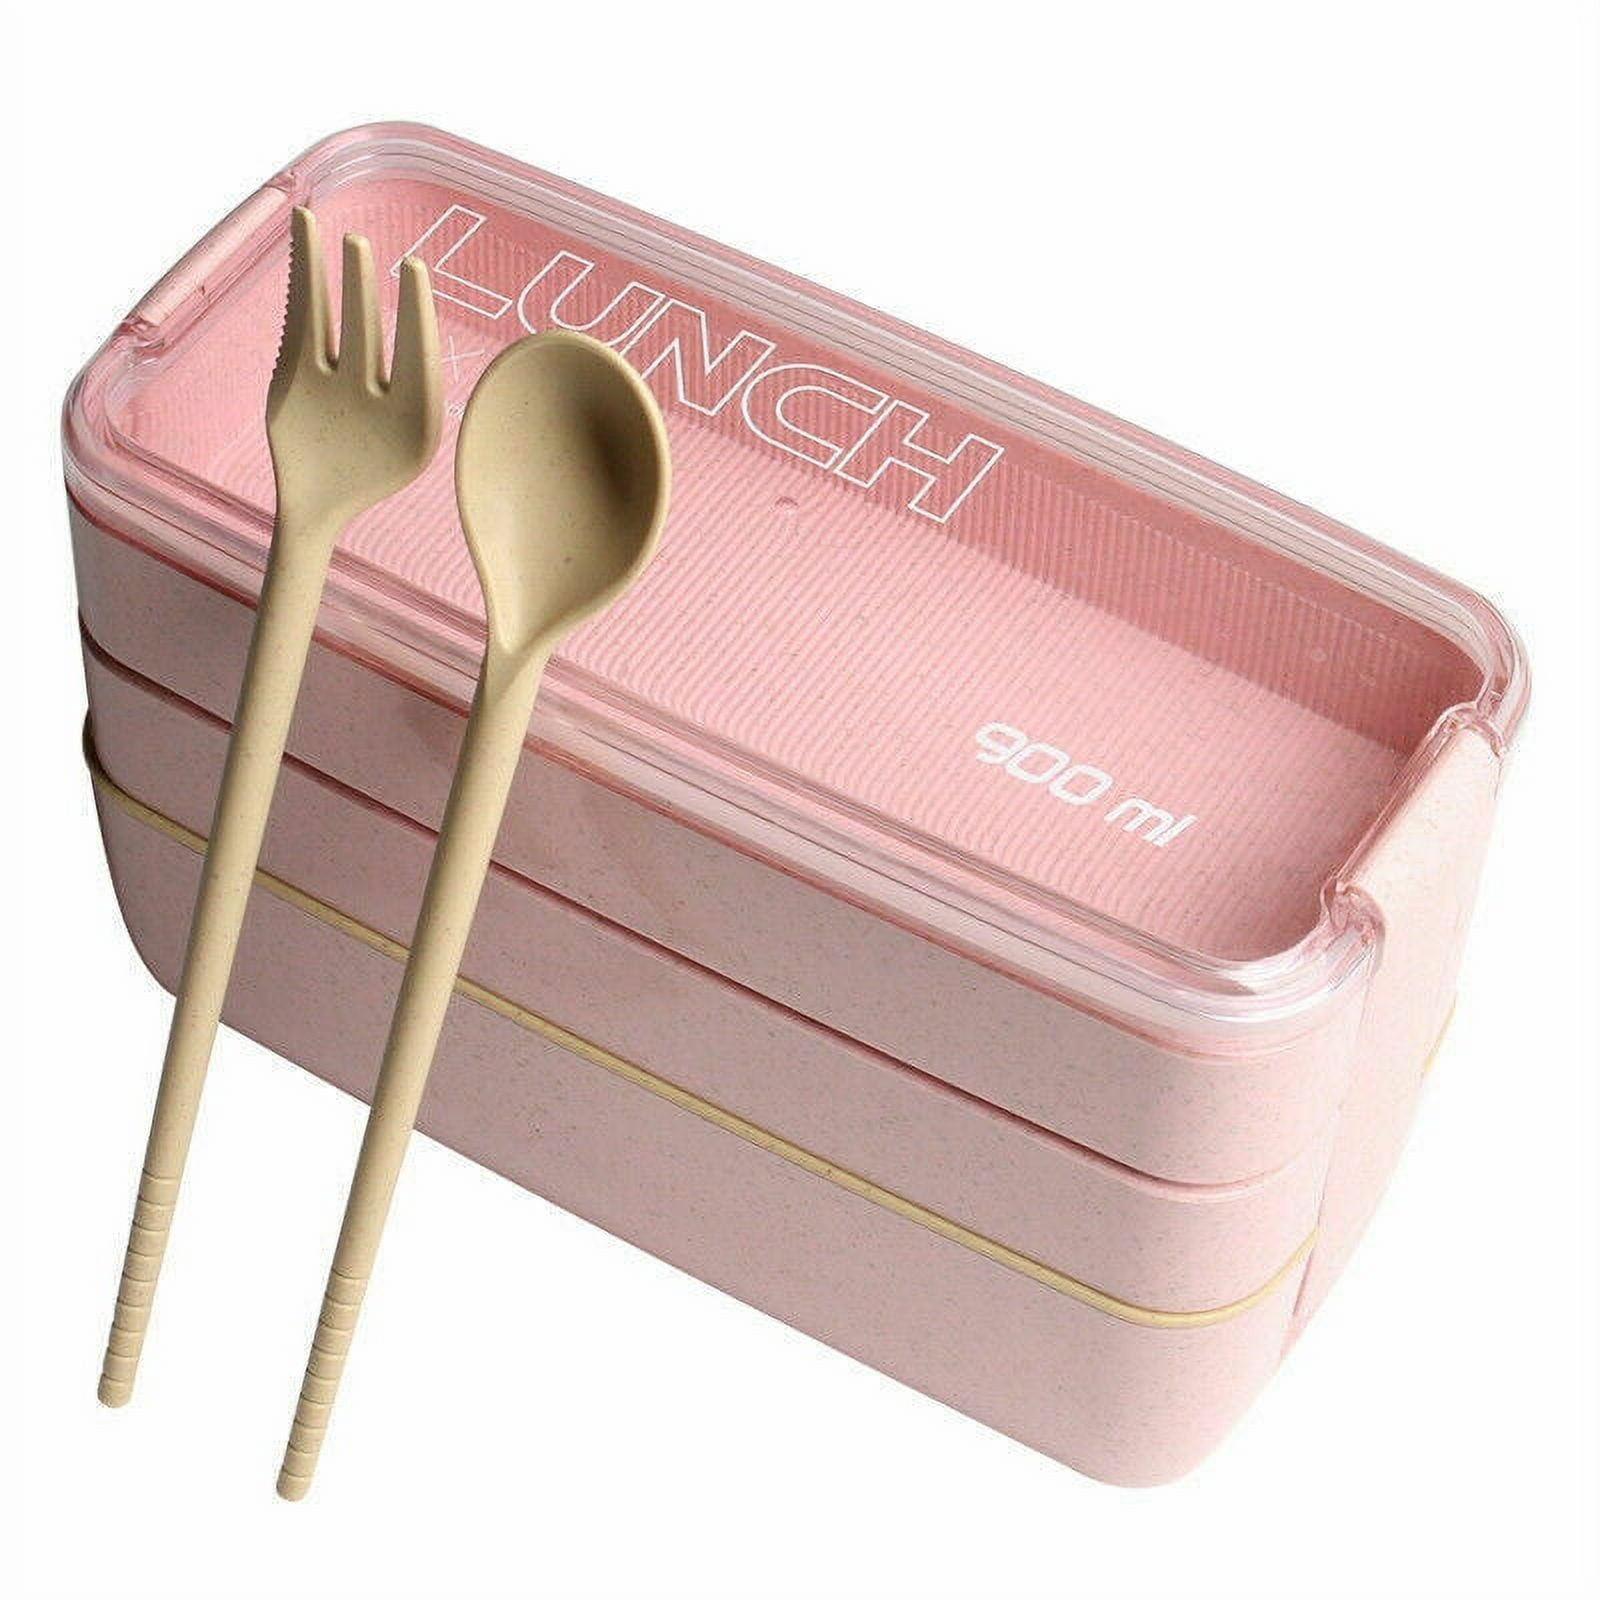 Cteegc Clearance Stackable Bento Box,Lunch Box Kit with Spoon & Fork, 3-in-1 Compartment Whea-t Straw Meal Prep Containers,Leakproof Eco-Friendly